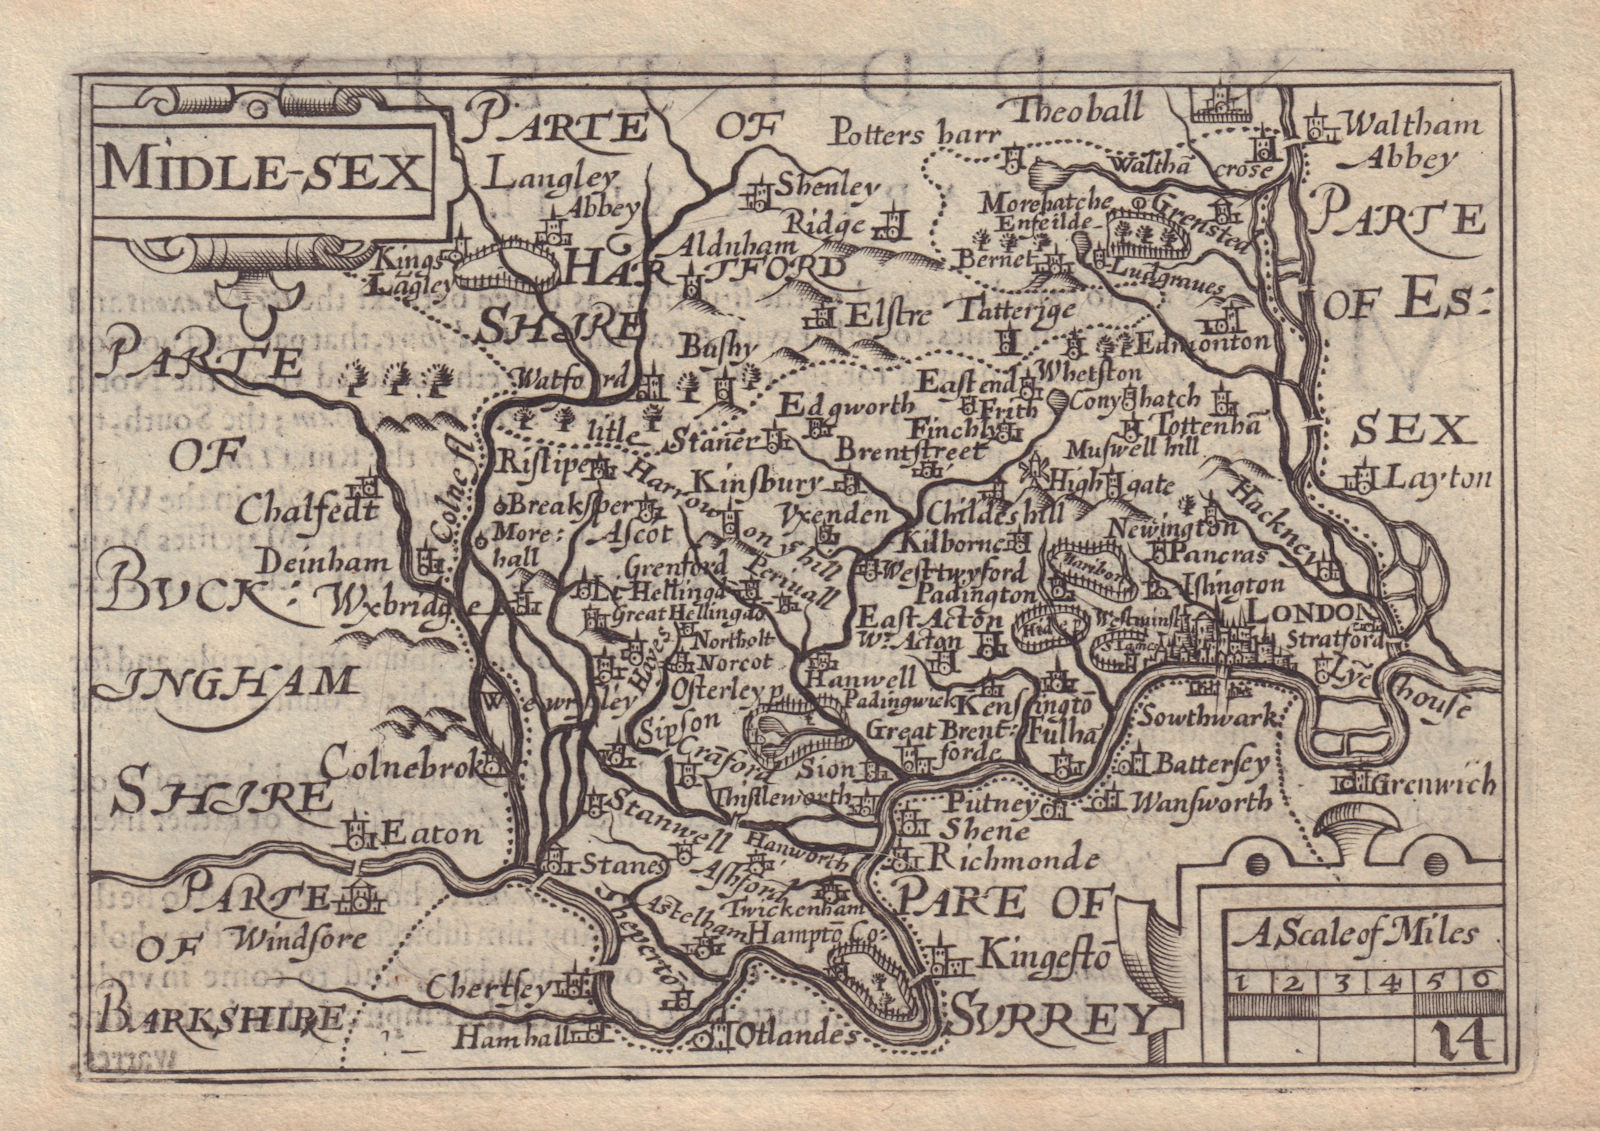 Associate Product Midle-sex by van den Keere. "Speed miniature" London & Middlesex county map 1632